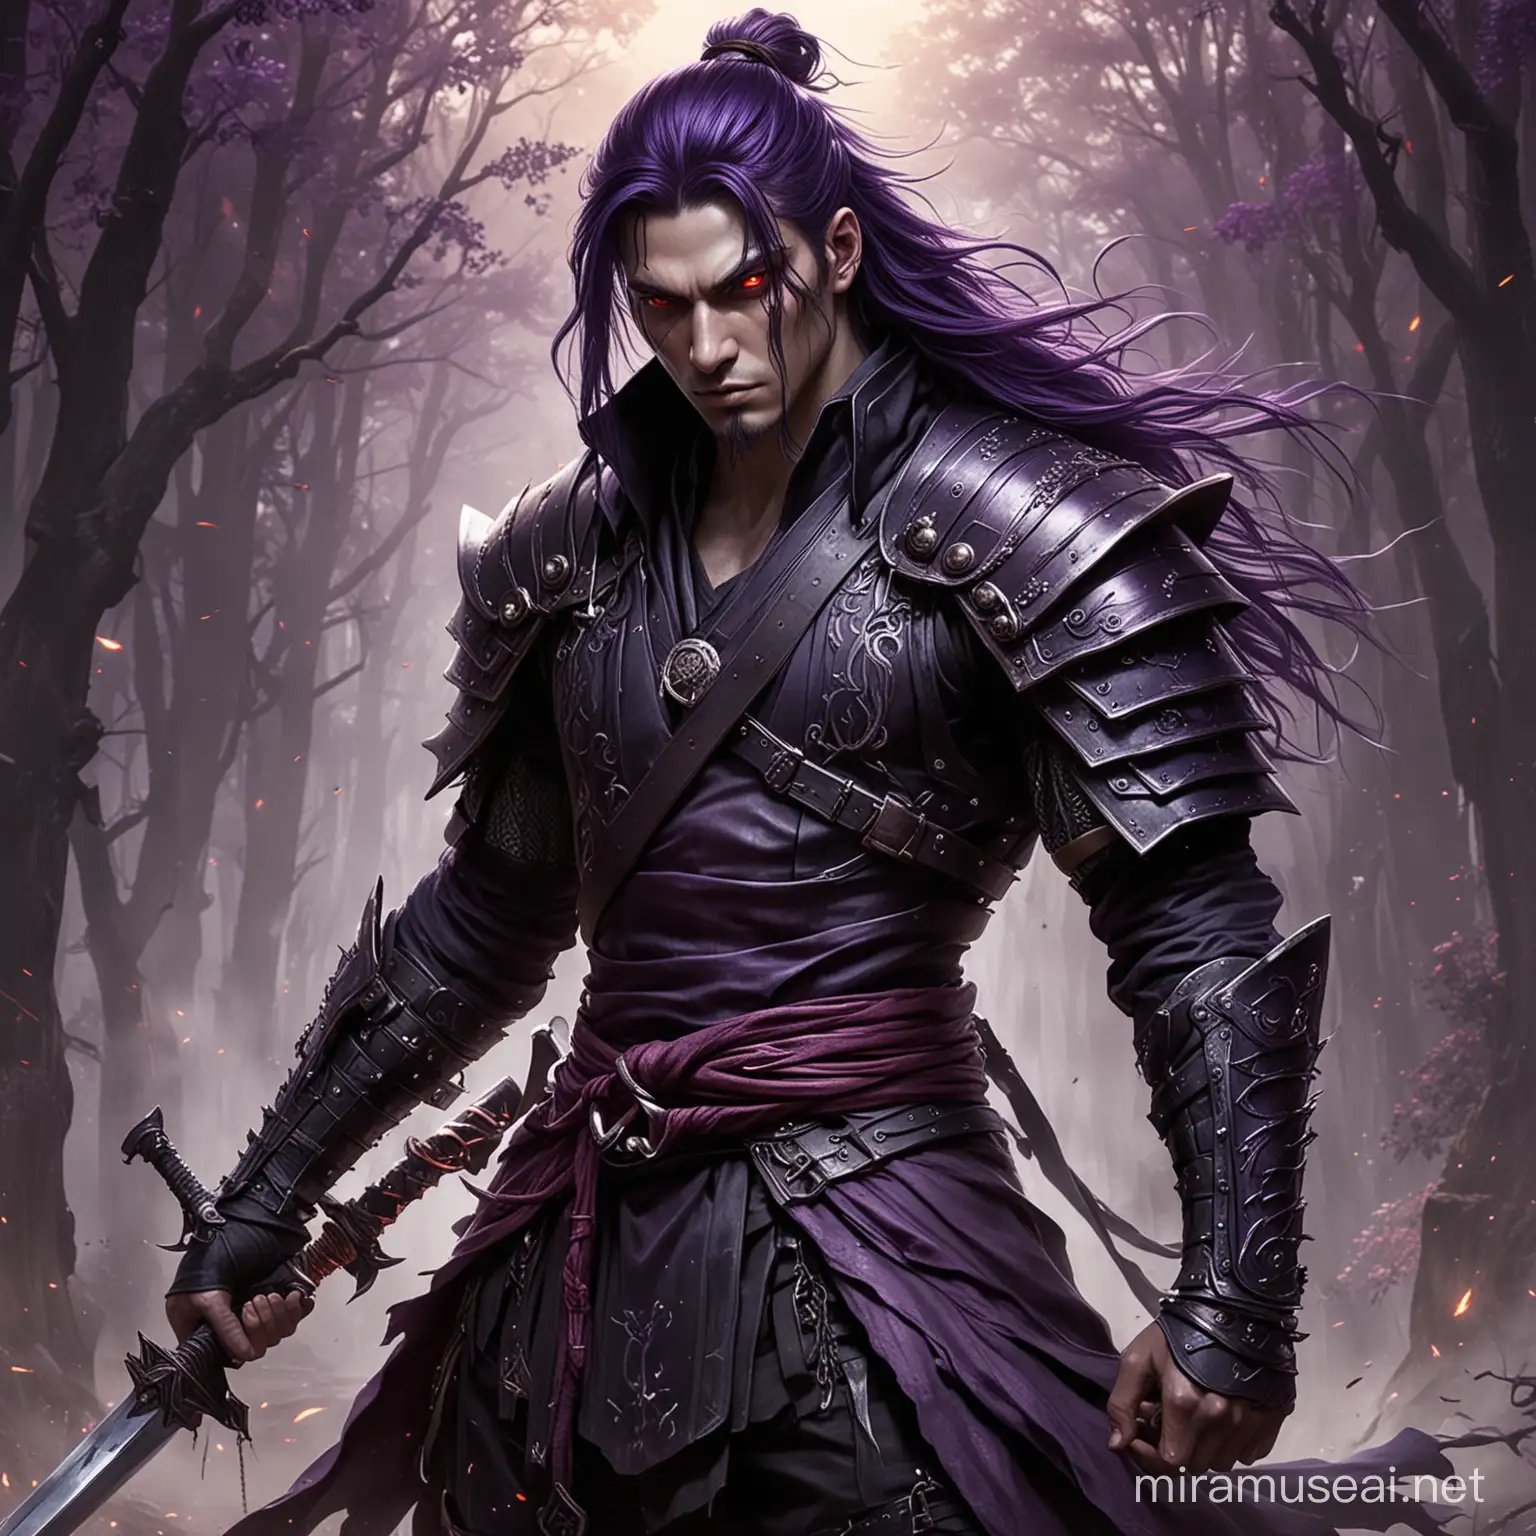 Acheron stands tall and enigmatic, a human warrior with pale skin, long dark purple hair cascading down his back, and piercing bright violet eyes that seem to hold hidden depths. He dons a black and purple samurai-inspired outfit, featuring a long-sleeved jacket and asymmetrical boots that speak of his martial prowess. Adorning his attire are accessories such as a chitinous shoulder guard and a chain wrapped around his left wrist, hinting at a life steeped in battle.

A red and purple flame tattoo blazes on his thigh, adding a touch of mystique to his already imposing presence. In his hands, he wields an ōdachi sword, its blade etched with ancient runes, nestled within a scabbard bearing similar engravings. When he unsheathes his blade, his hair transforms from dark purple to radiant white, and his outfit shifts from black and purple to blood red, a manifestation of the latent power coursing through his veins.

This depiction captures the essence of Acheron as a formidable male warrior, mysterious and powerful, ready to face whatever challenges lie ahead.